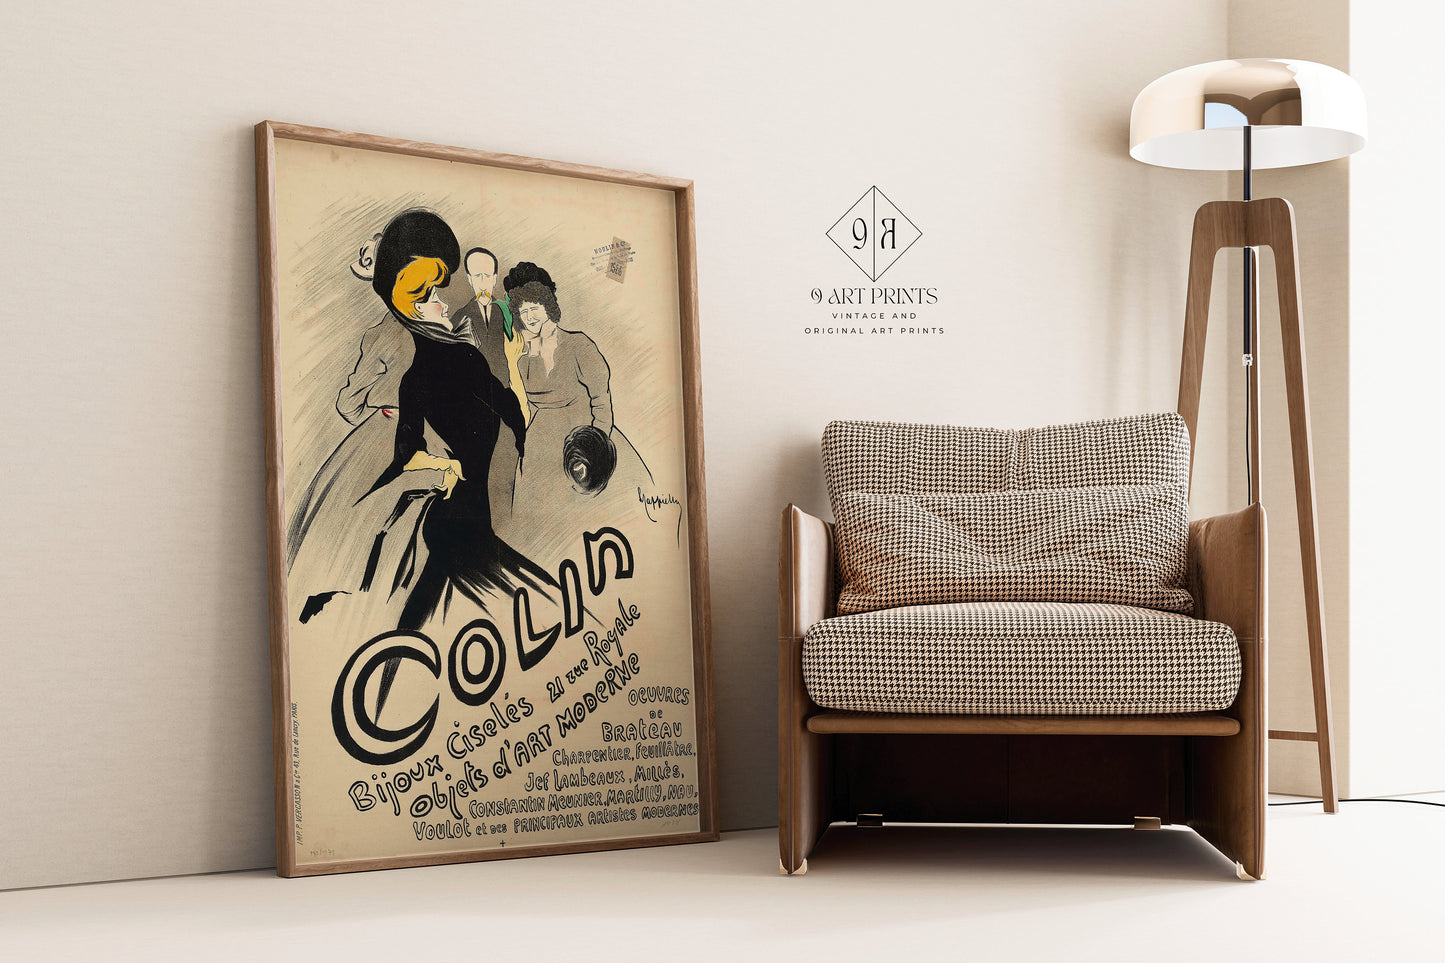 Leonetto Cappiello - Colin | Vintage Ad Poster (available framed or unframed)